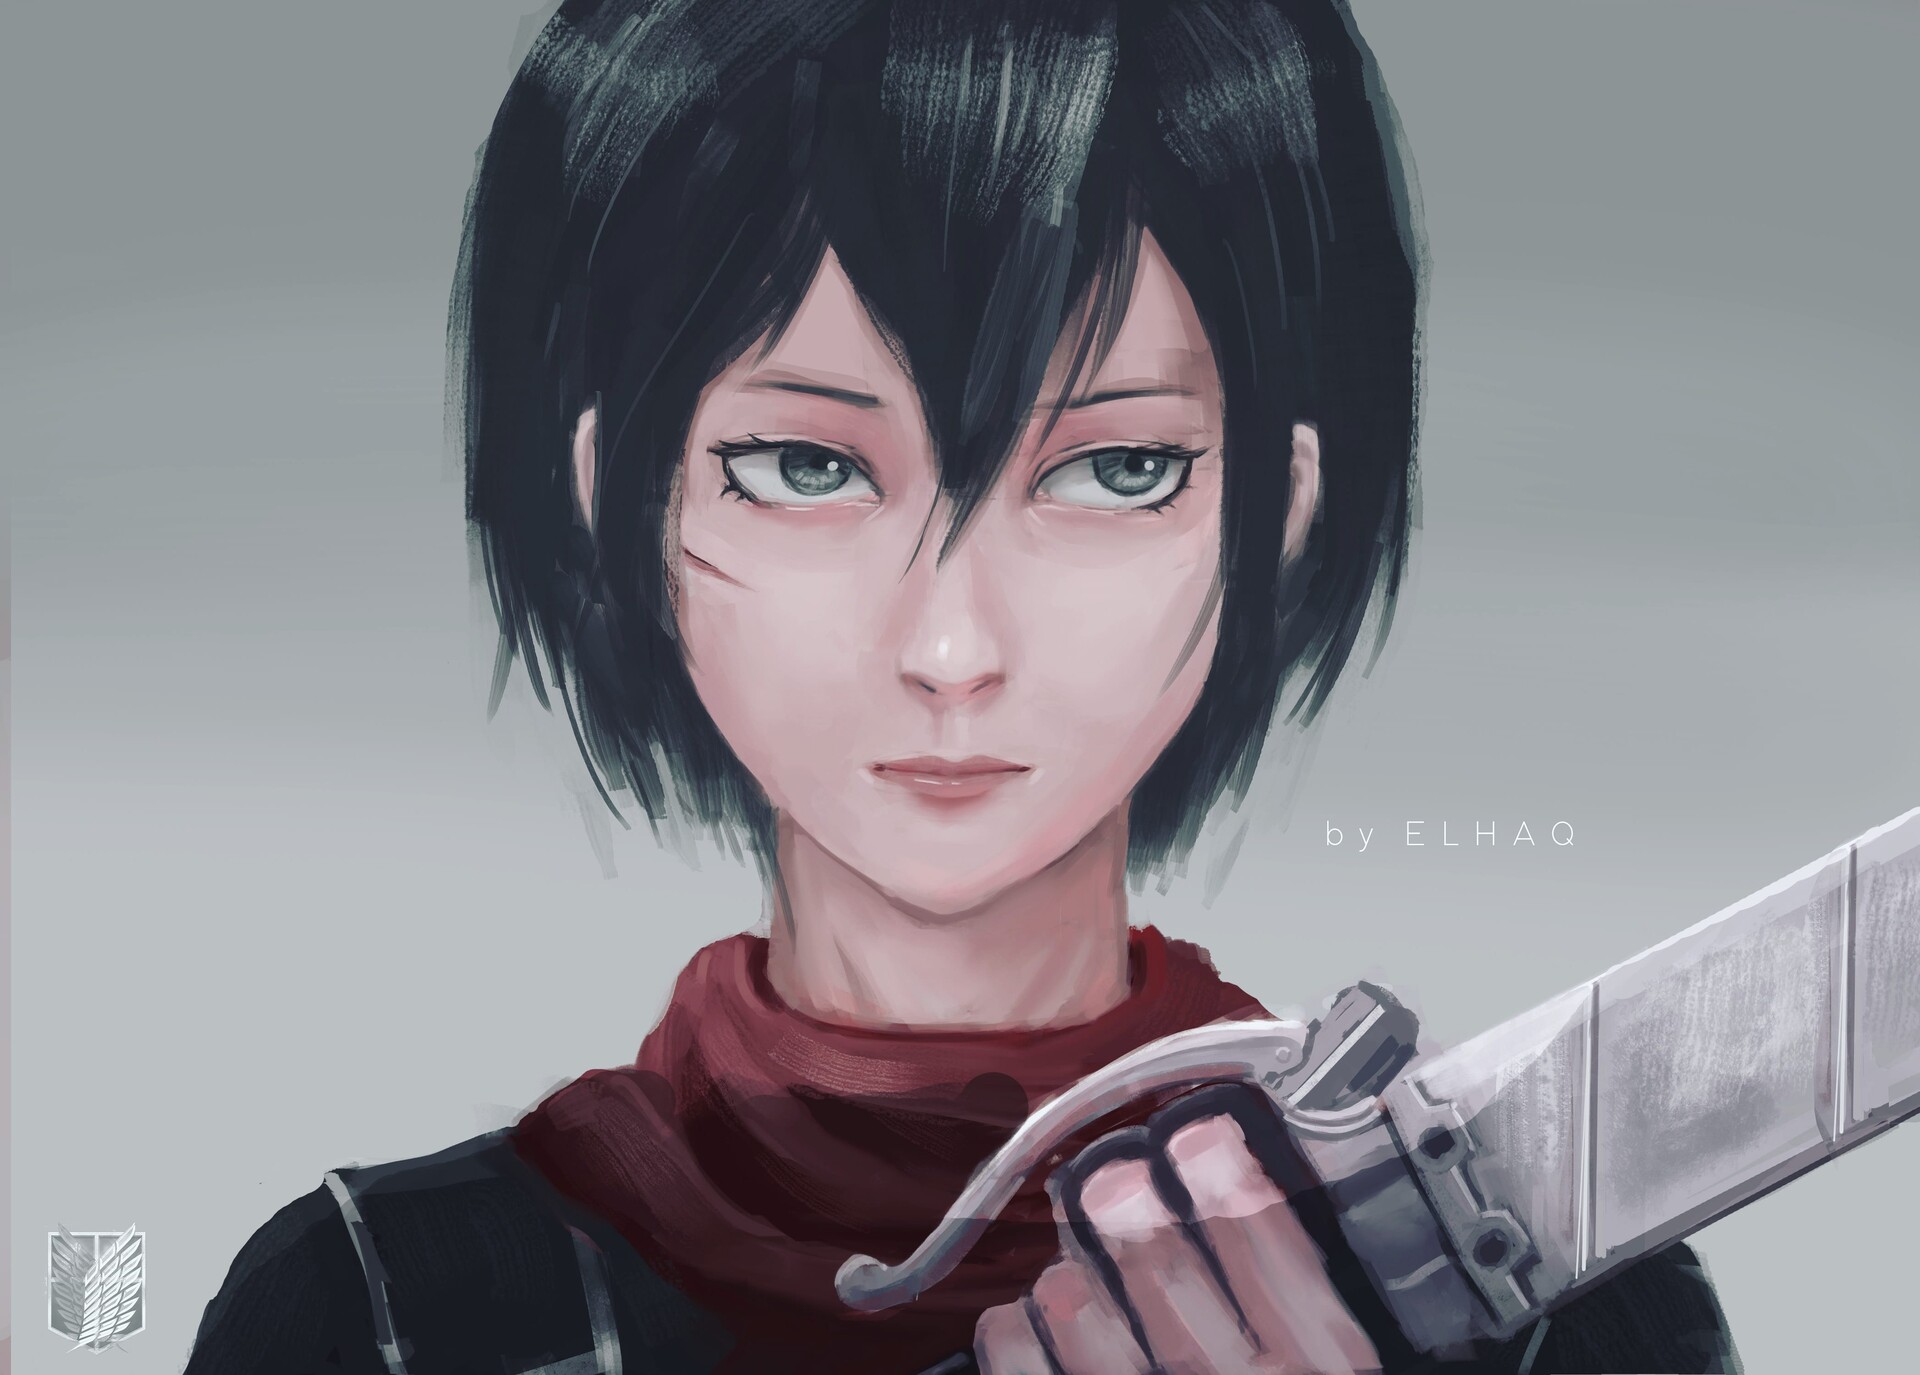 Mikasa Ackerman Wins The Poll Of Top-Loved Female Anime Characters